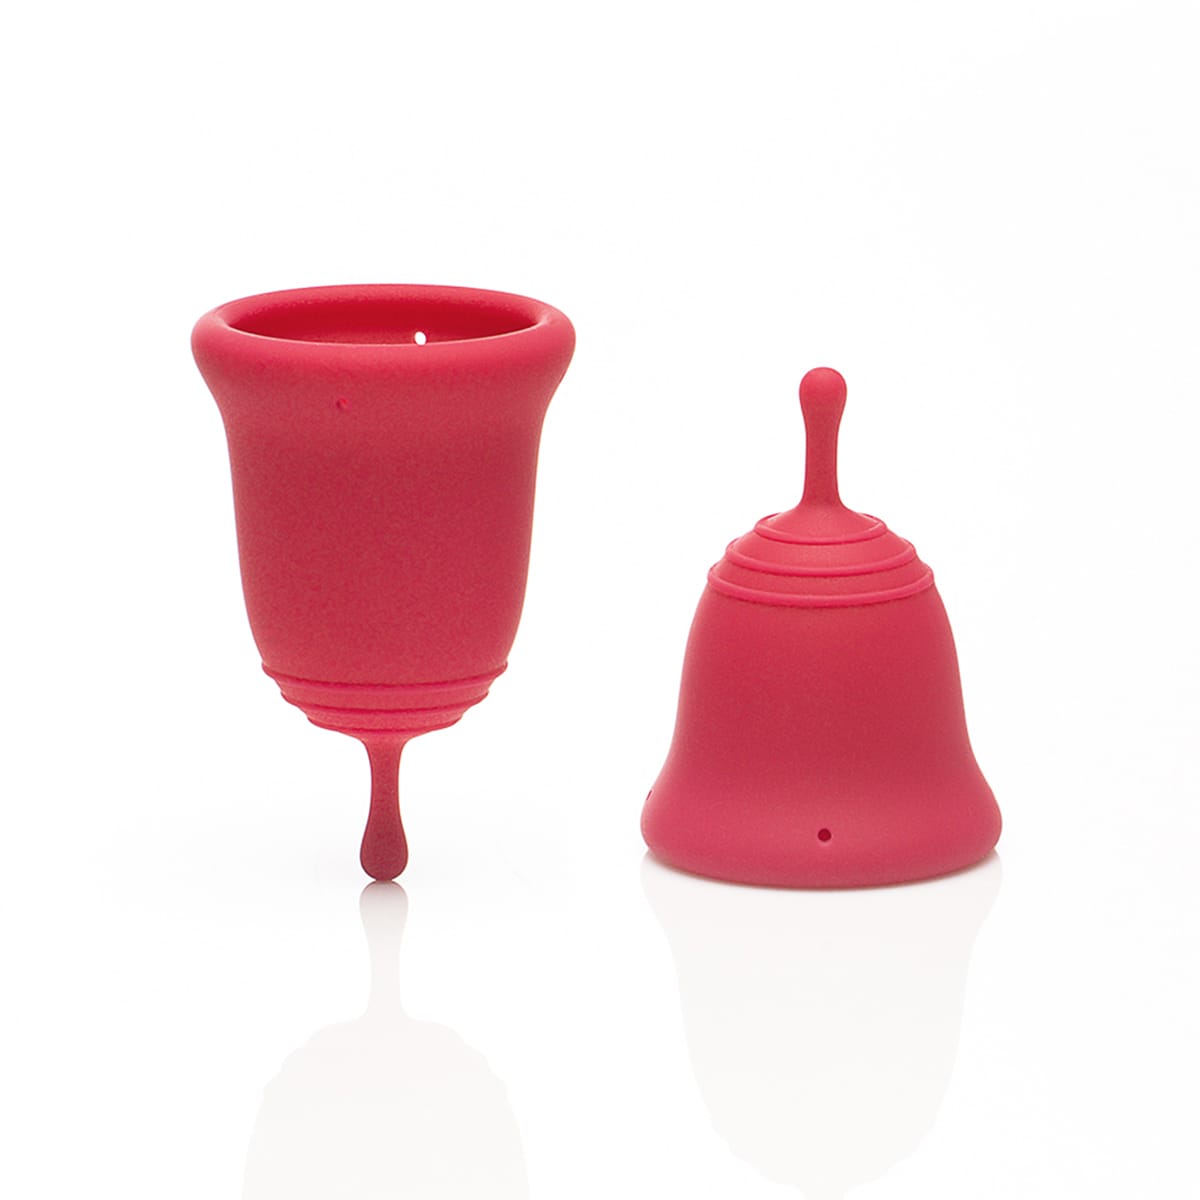 Buy SELF + Jimmyjane Menstrual Cups 2pc Set menstruation cups for your next cycle.